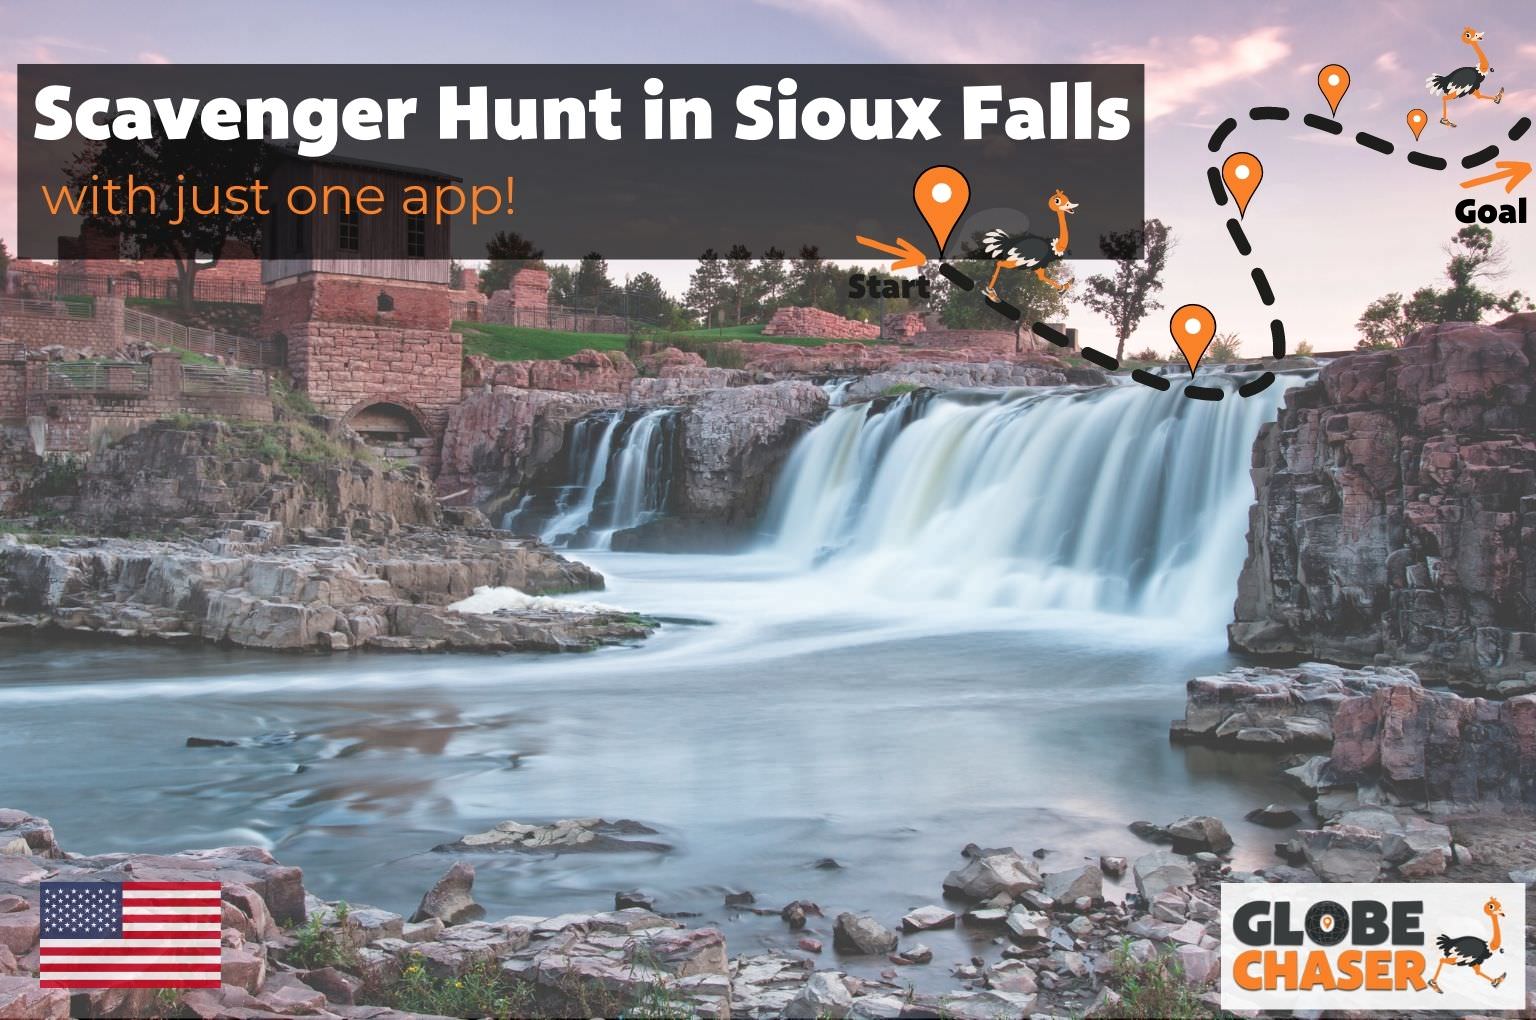 Scavenger Hunt in Sioux Falls, USA - Family Activities with the Globe Chaser App for Outdoor Fun